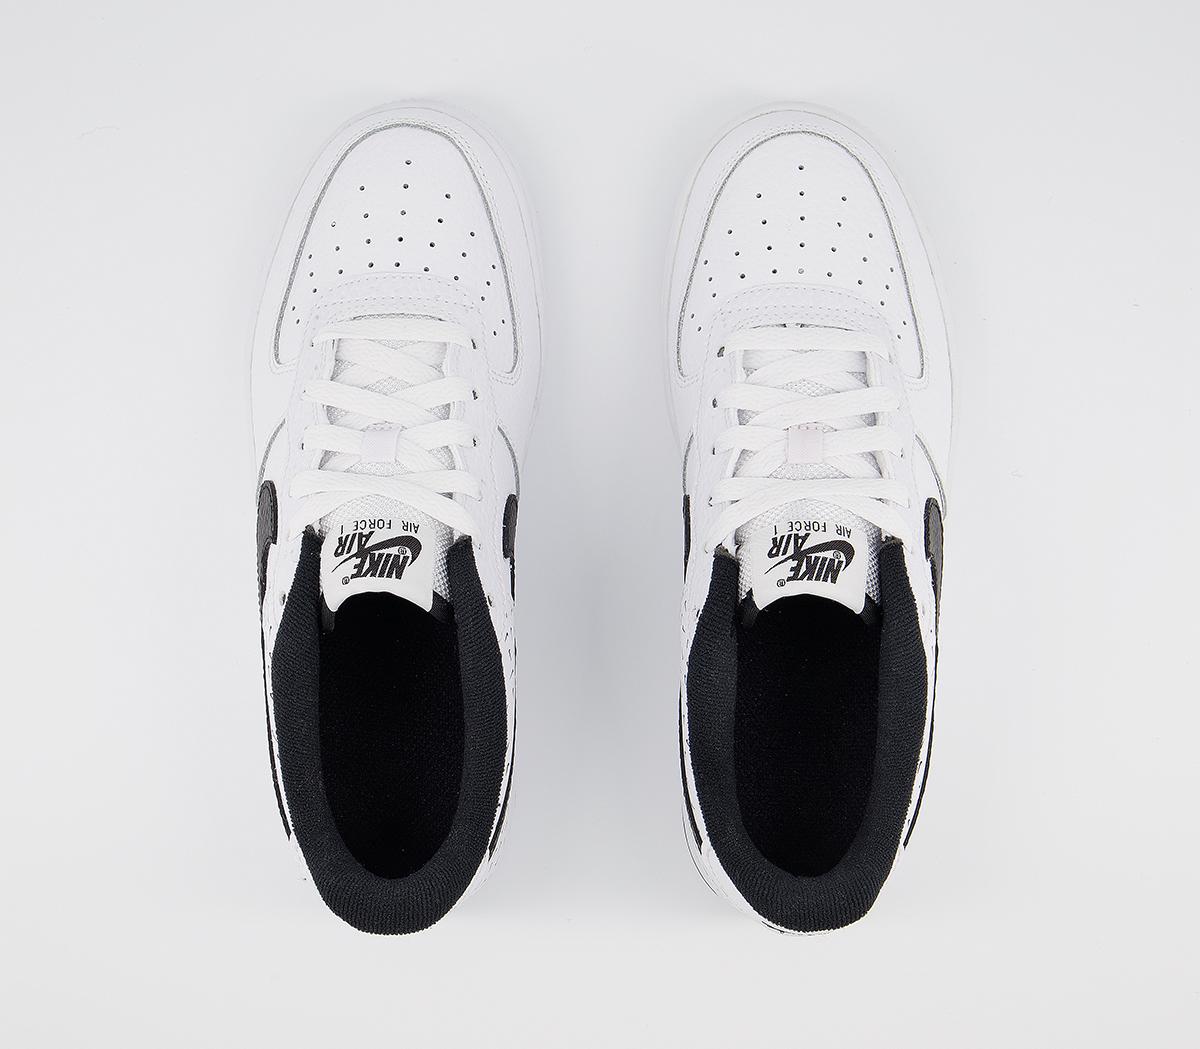 Nike Af1 Boys Trainers White Black Swooshfetti - Women's Trainers